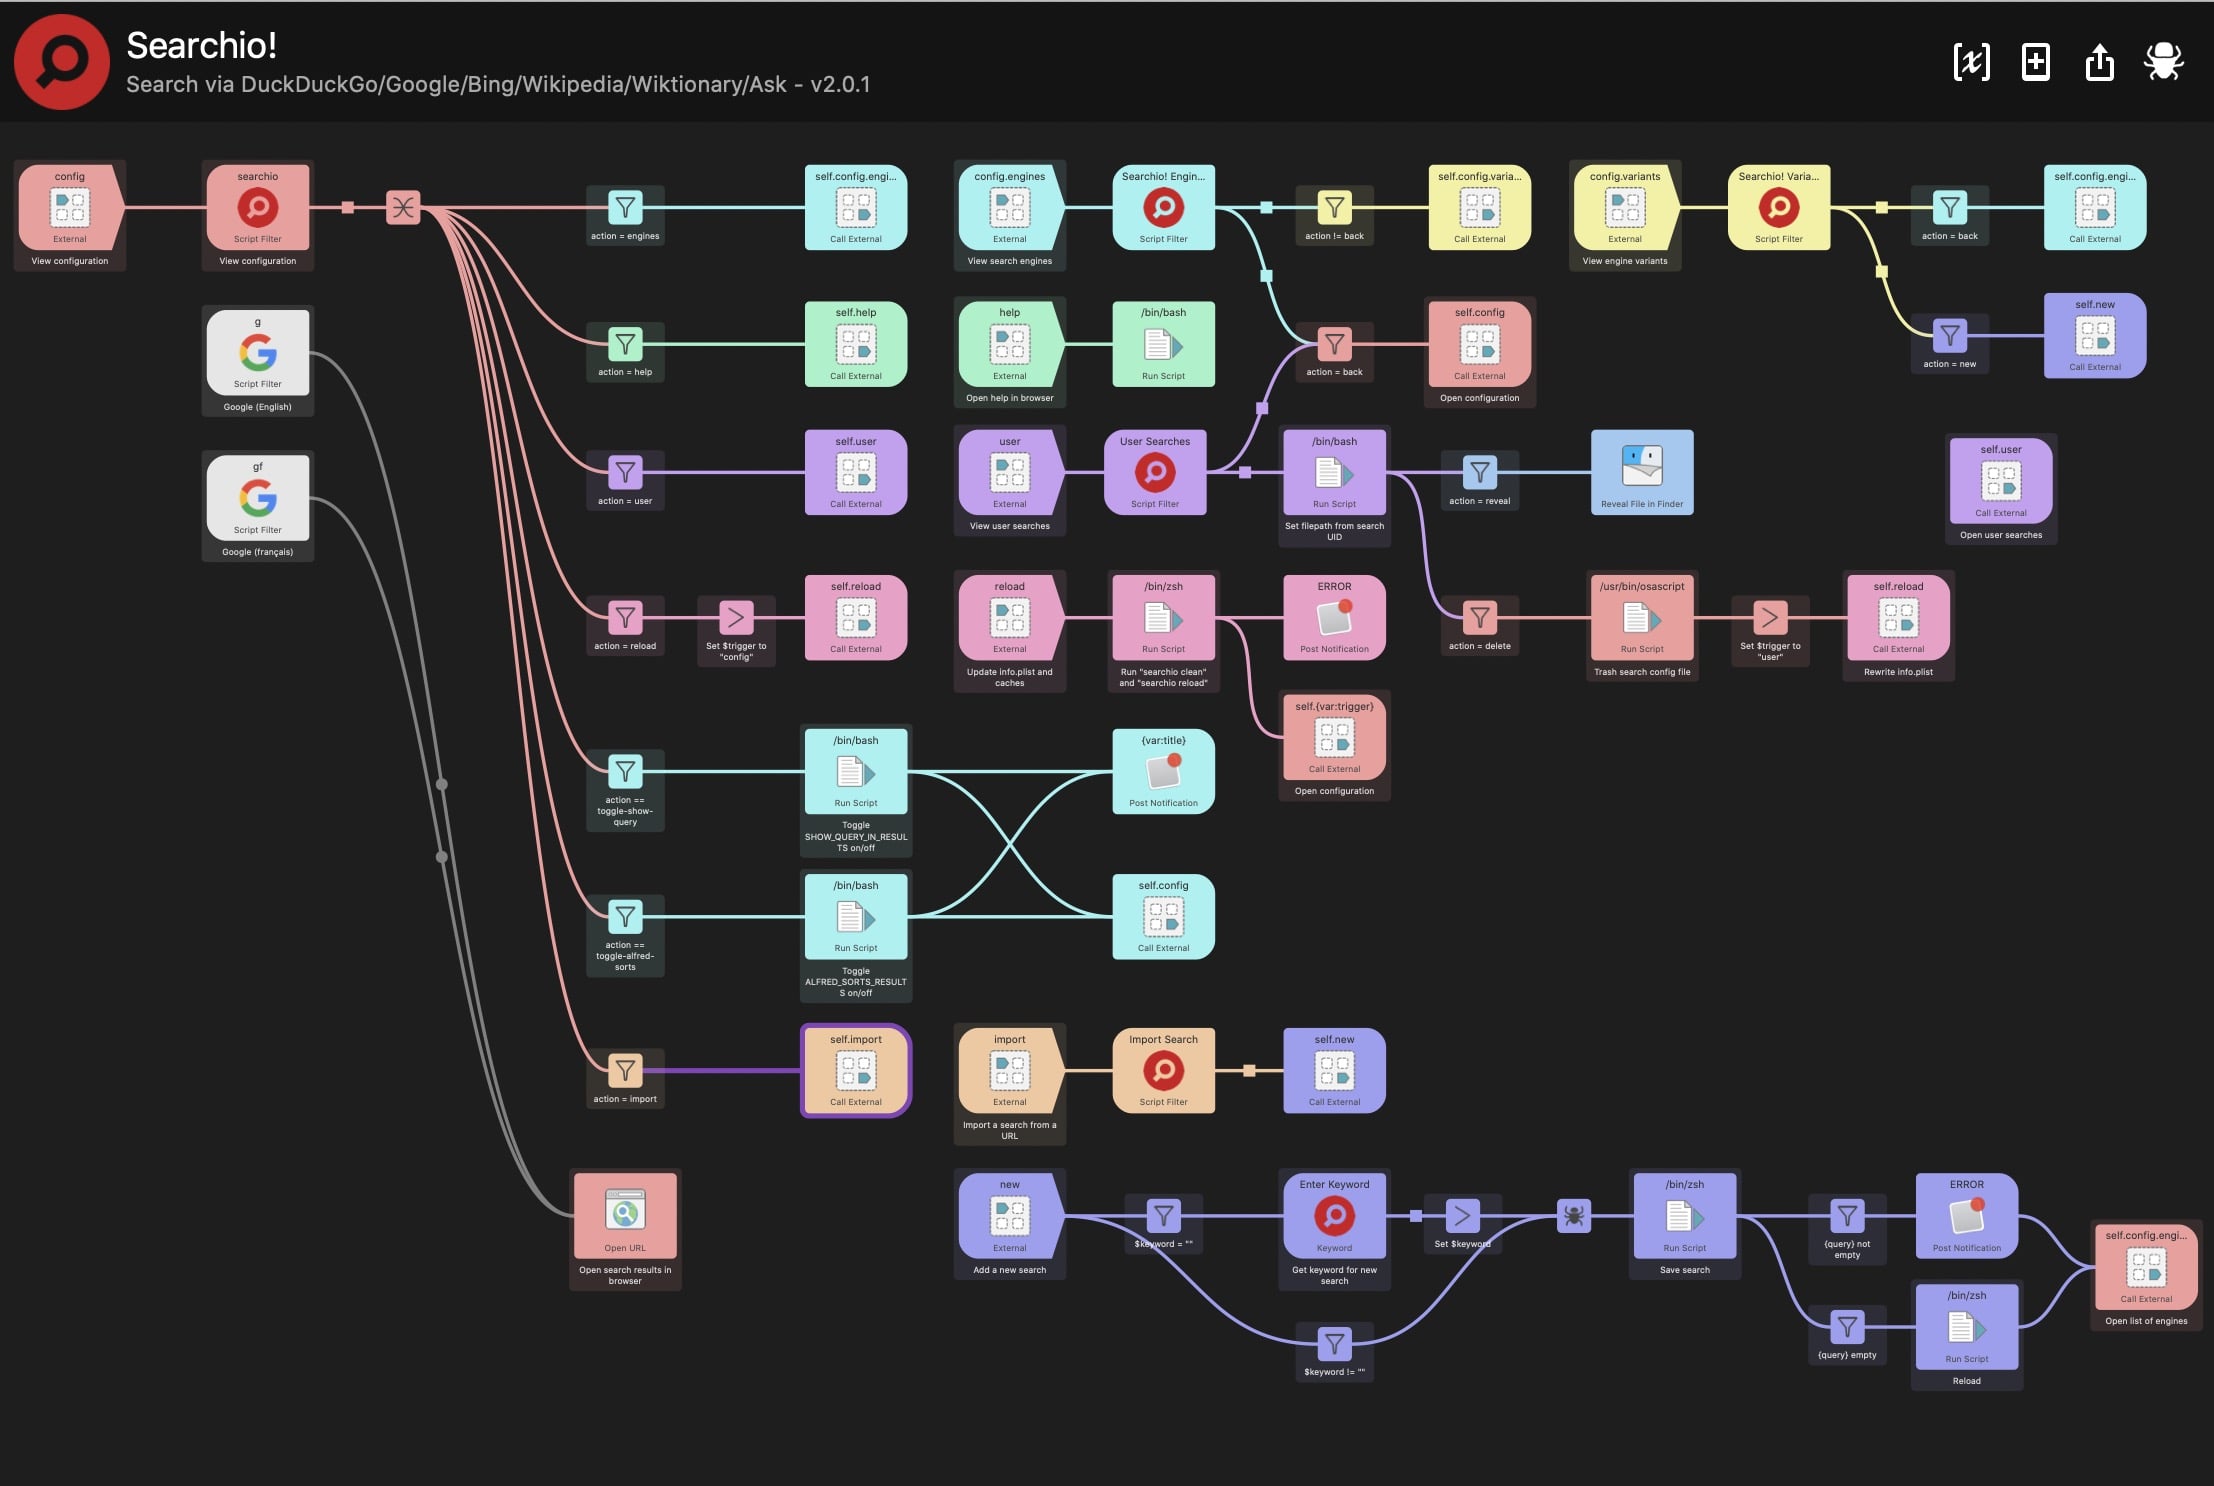 Ok, it looks scary. But don't worry, Workflows don't have to be that complex.